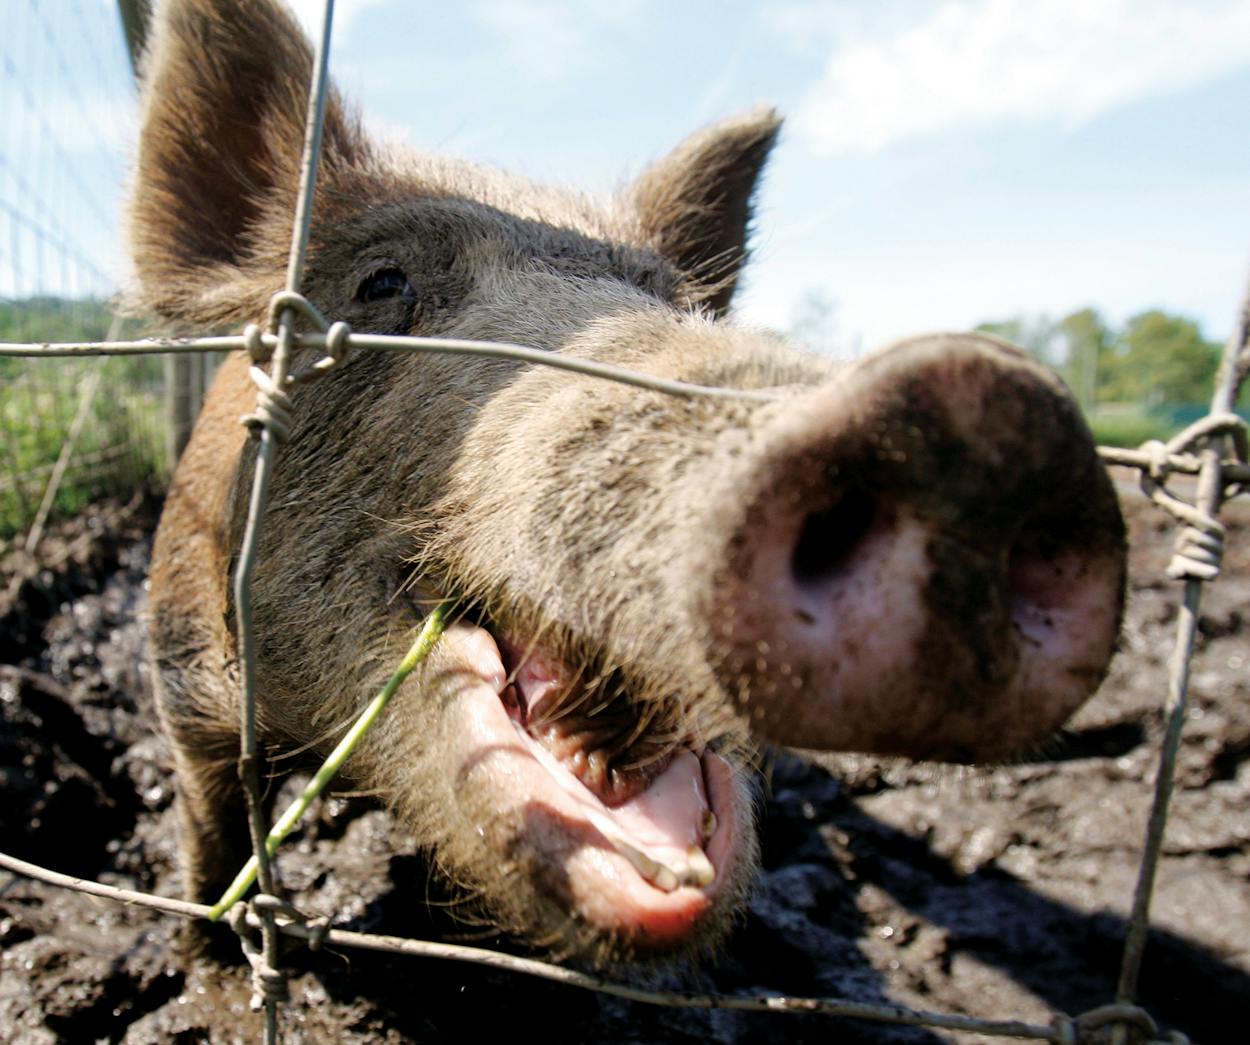 Close-up of a feral hog sticking its snout through a wire fence.